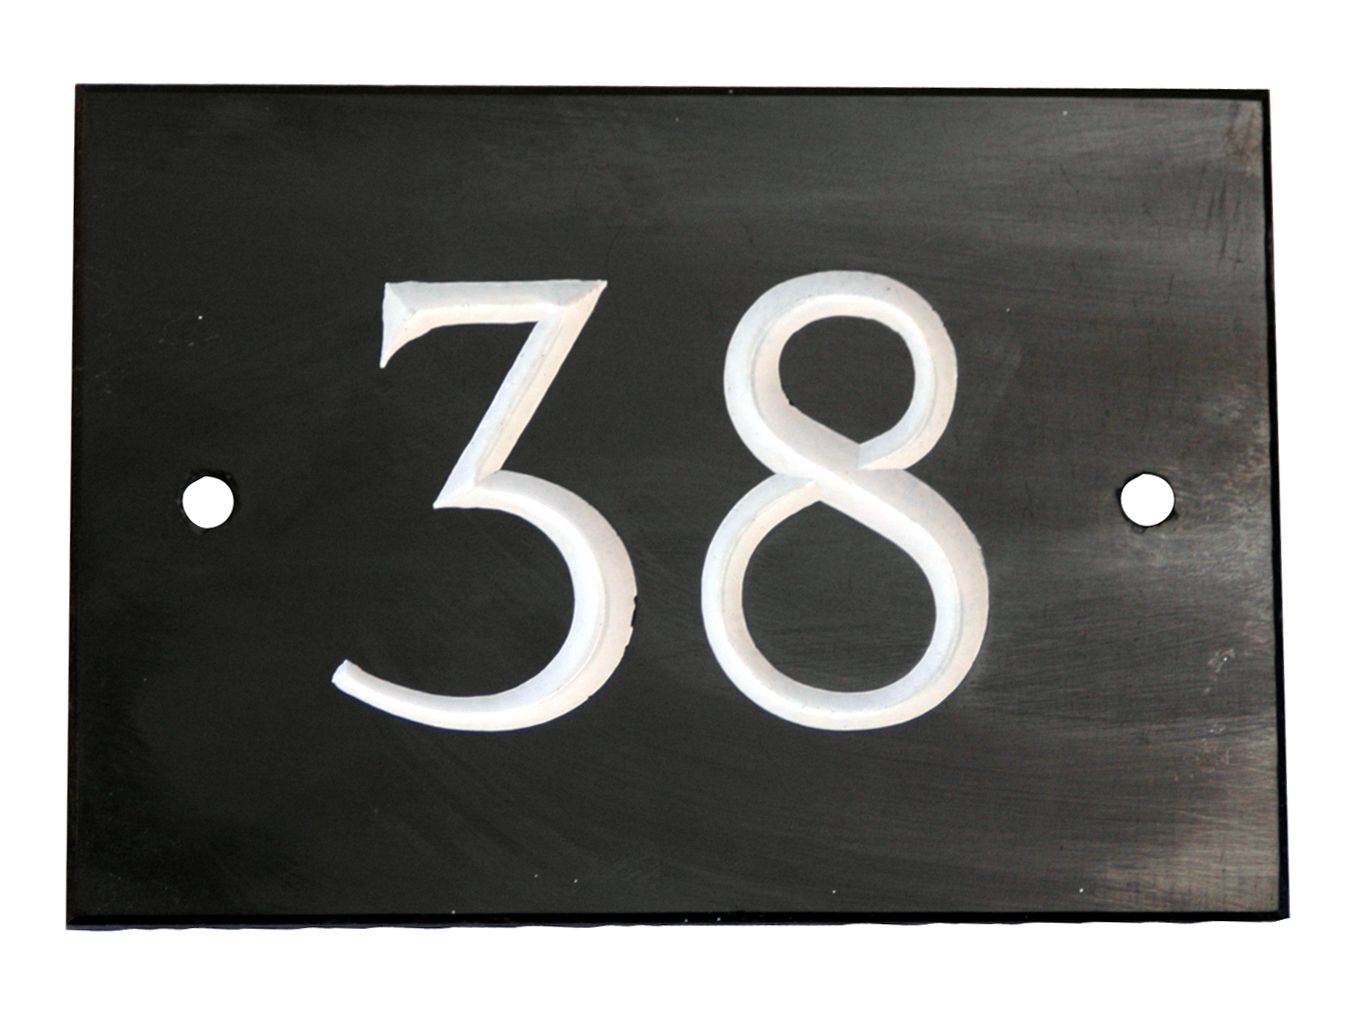 The House Nameplate Company Black & white Slate Rectangular House number 38, (H)102mm (W)140mm